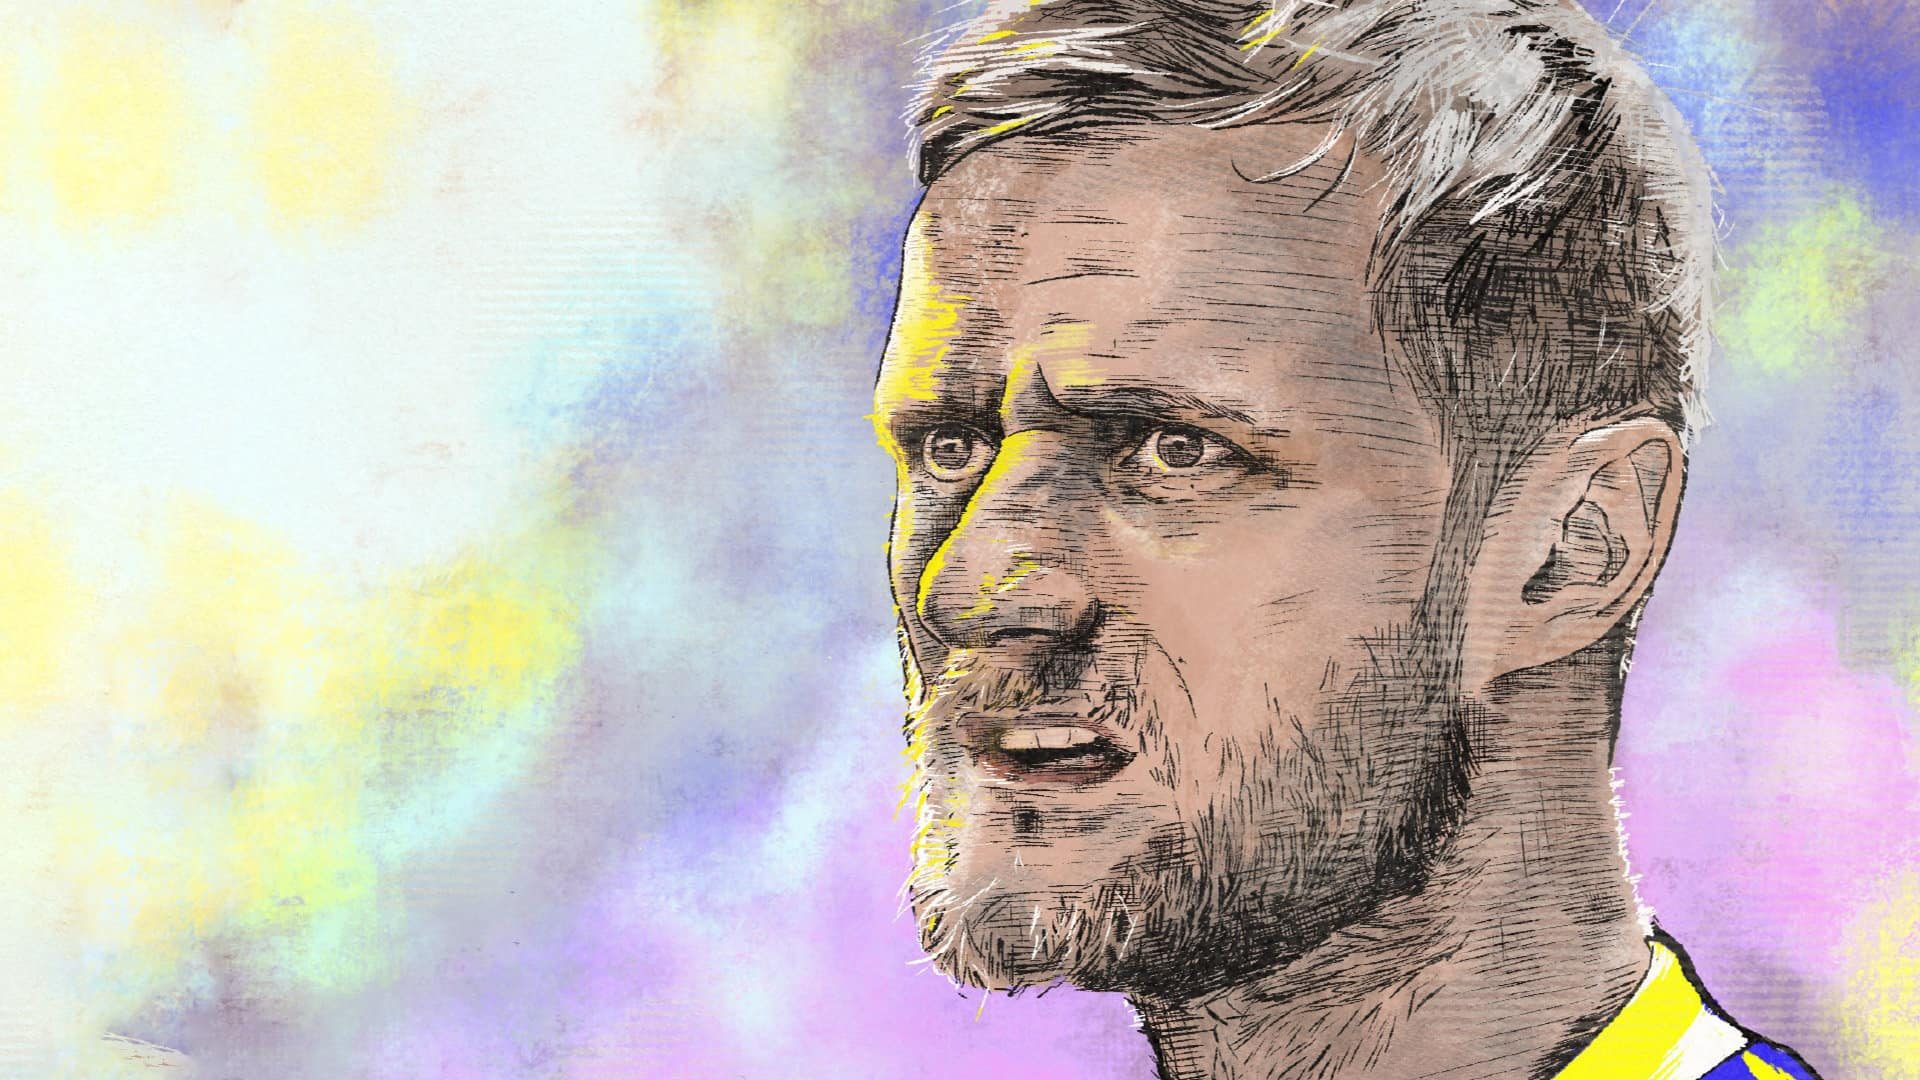 An illustration of Liam Cooper with the expression of a man contemplating an existential crisis